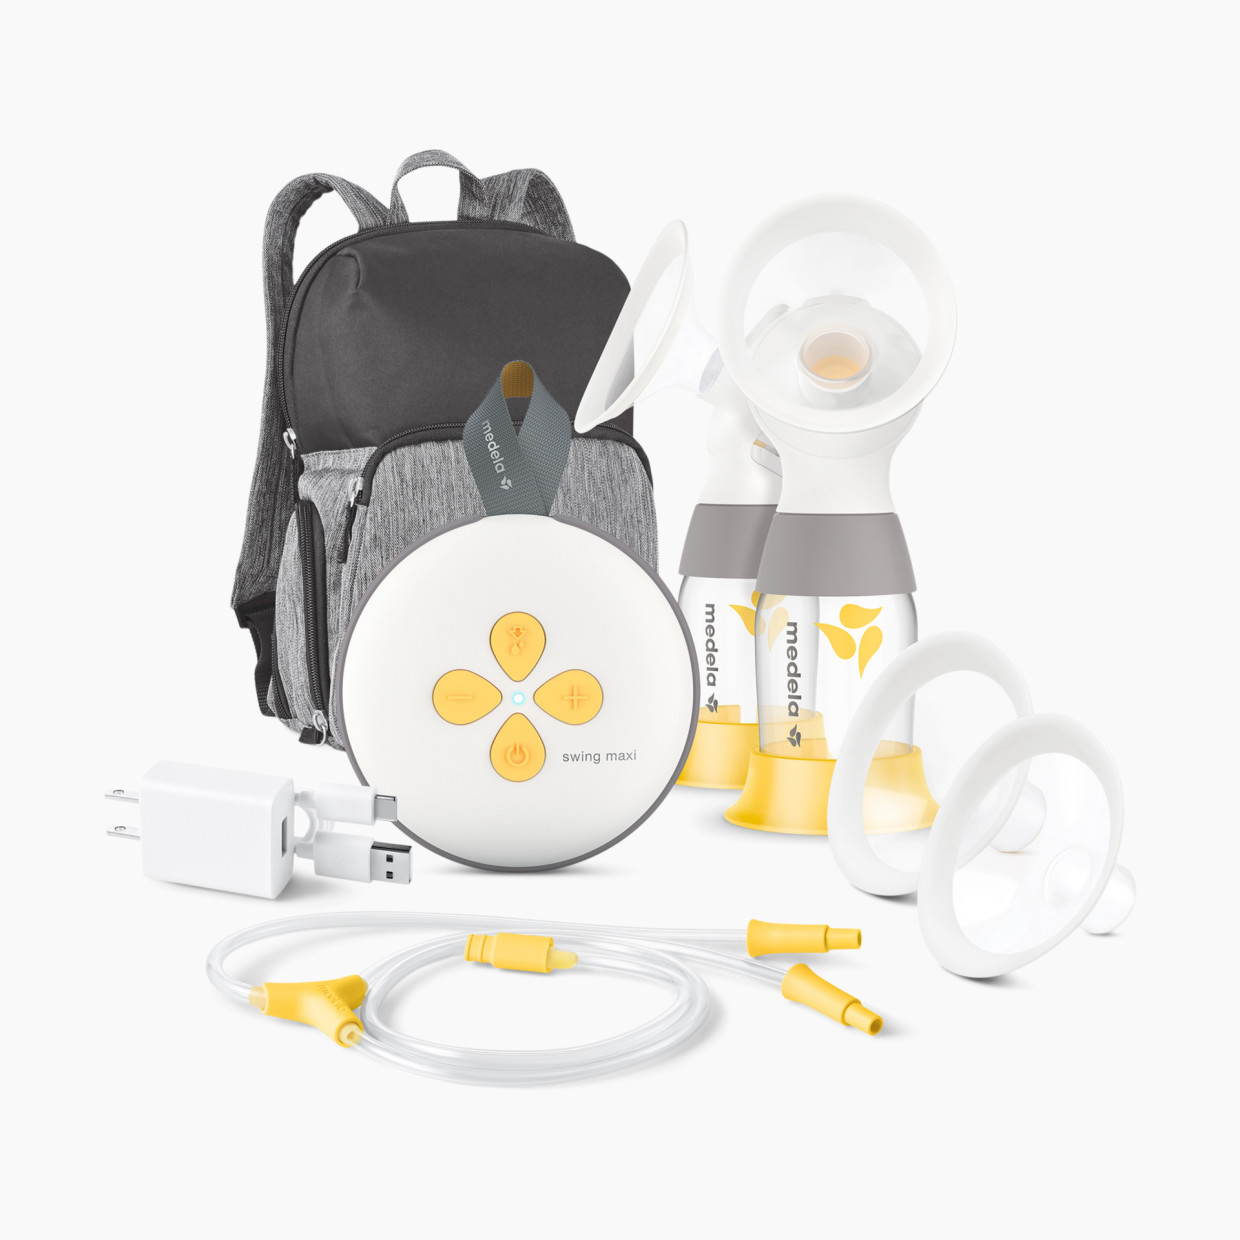 Medela Swing Maxi Double Electric Breast Pump with Bag and Accessories.